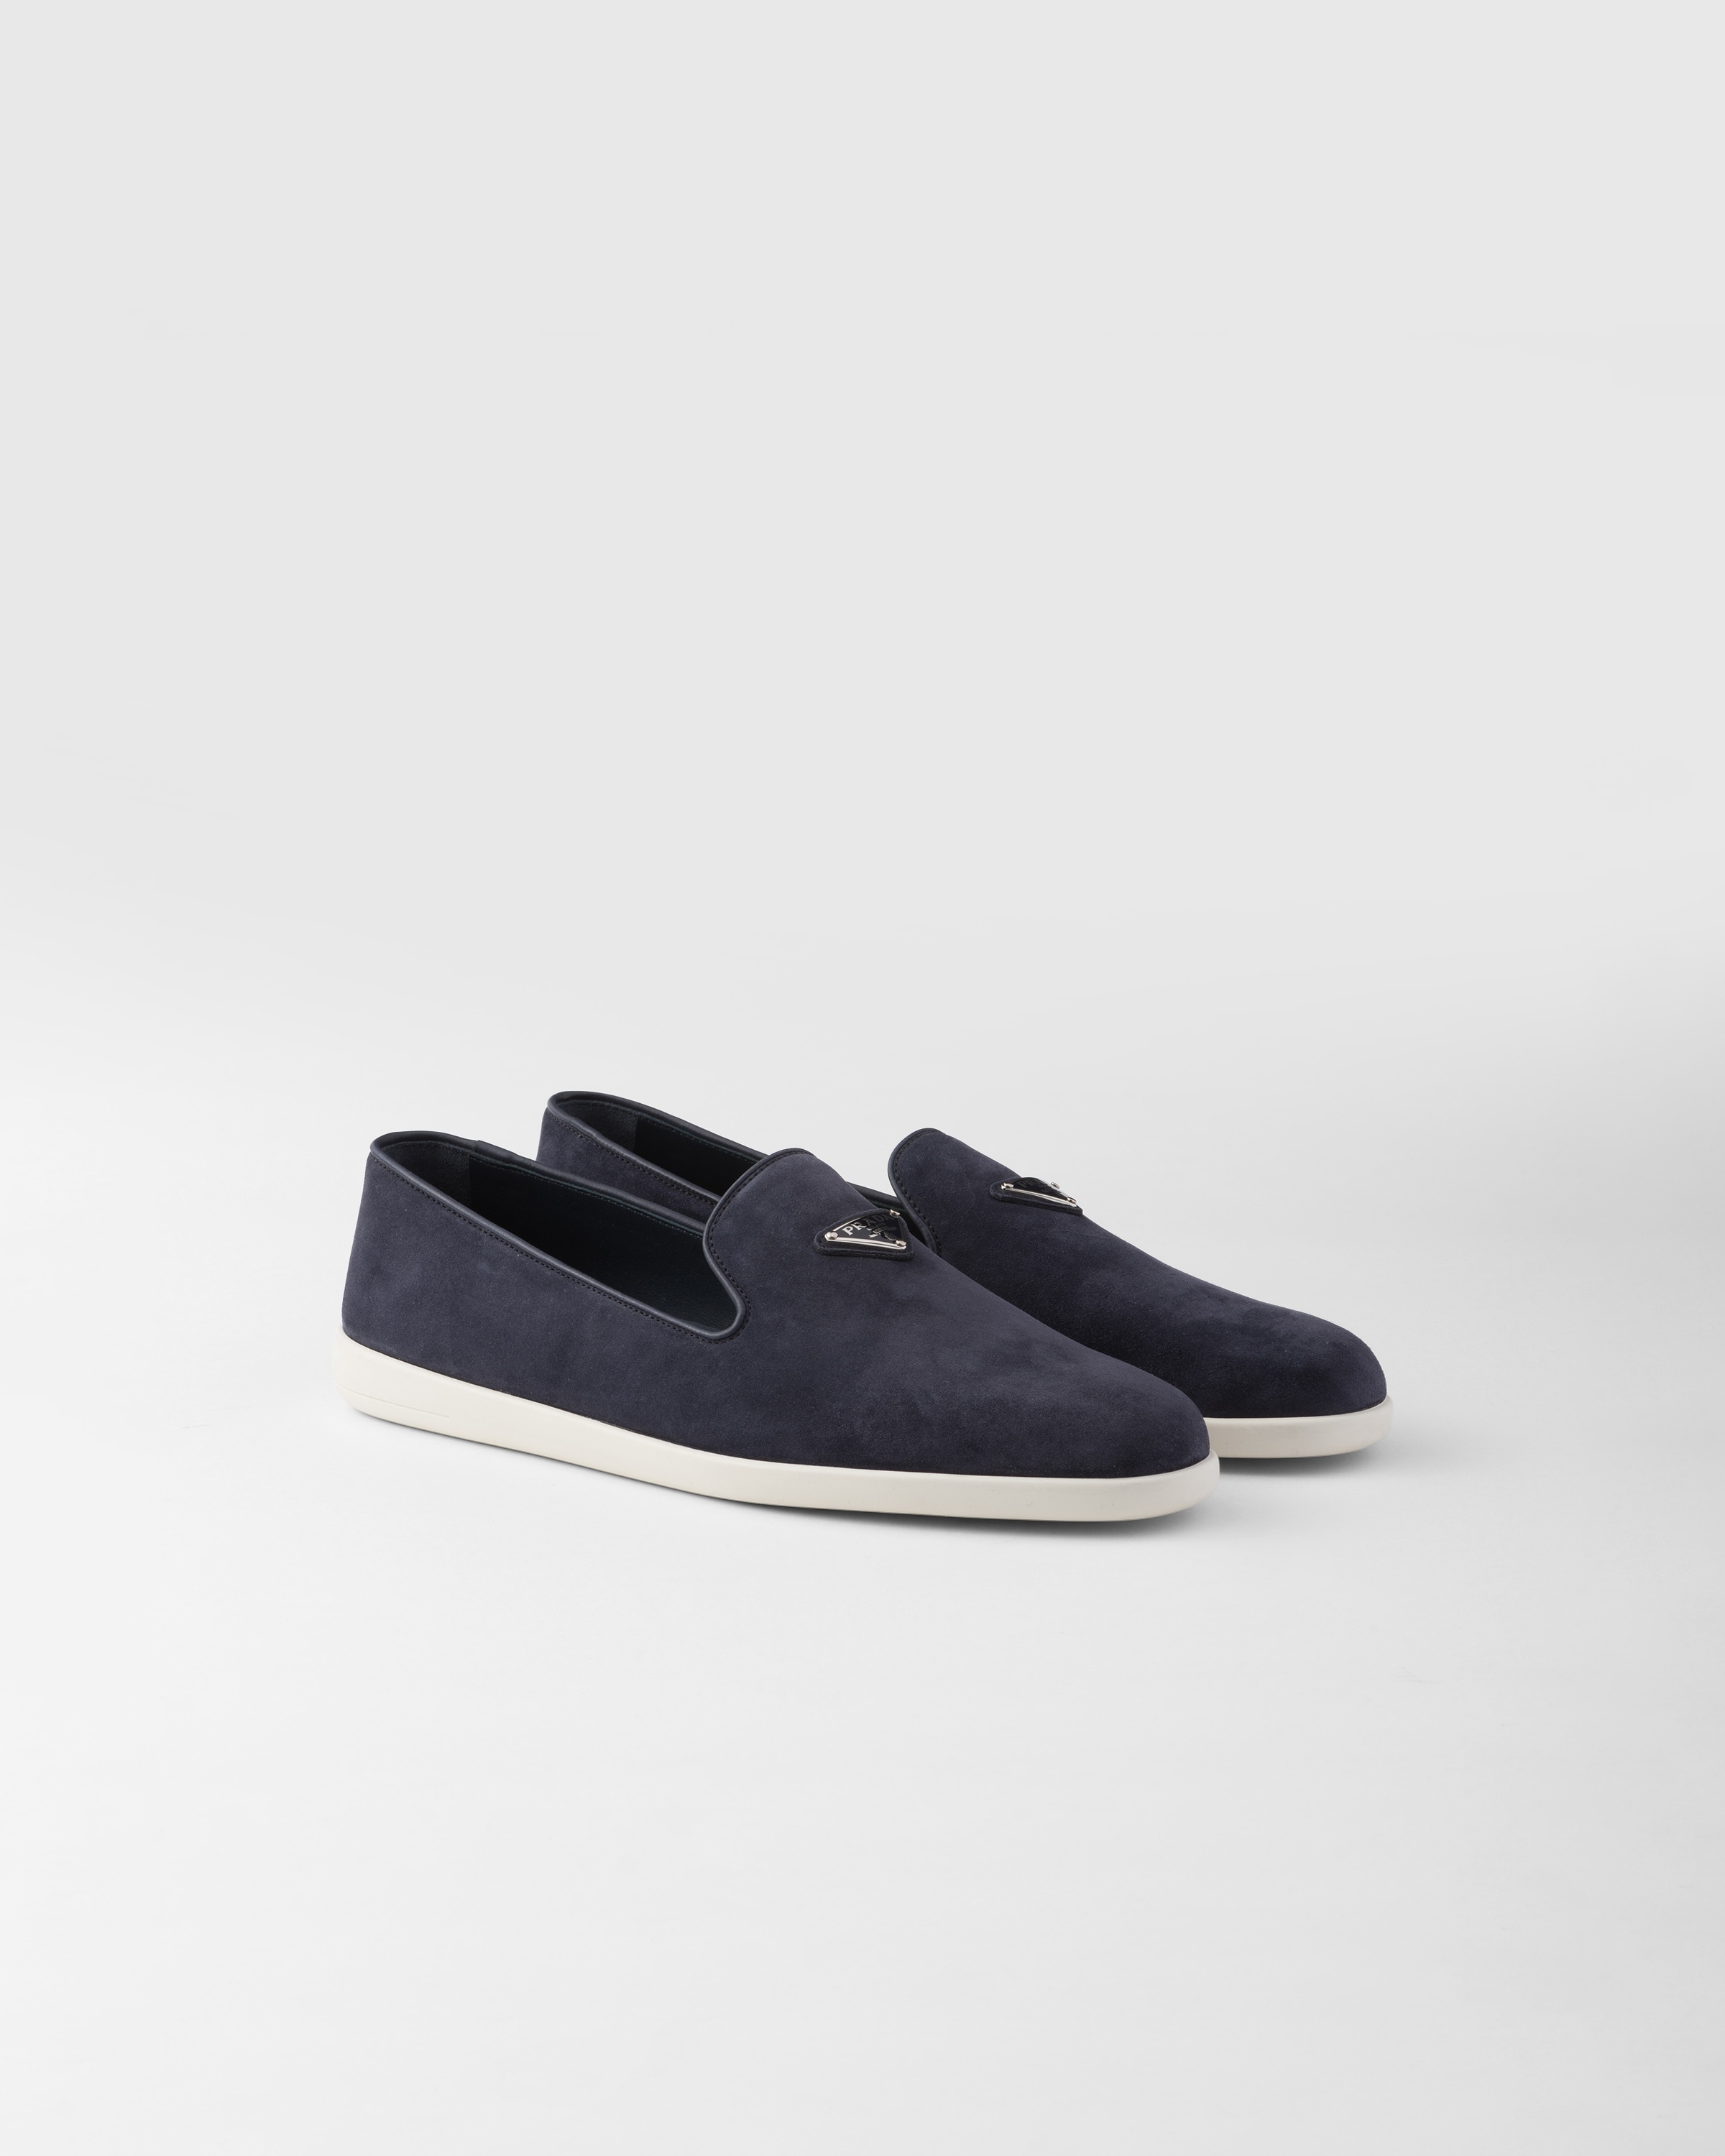 Suede calf leather slip-ons - 1